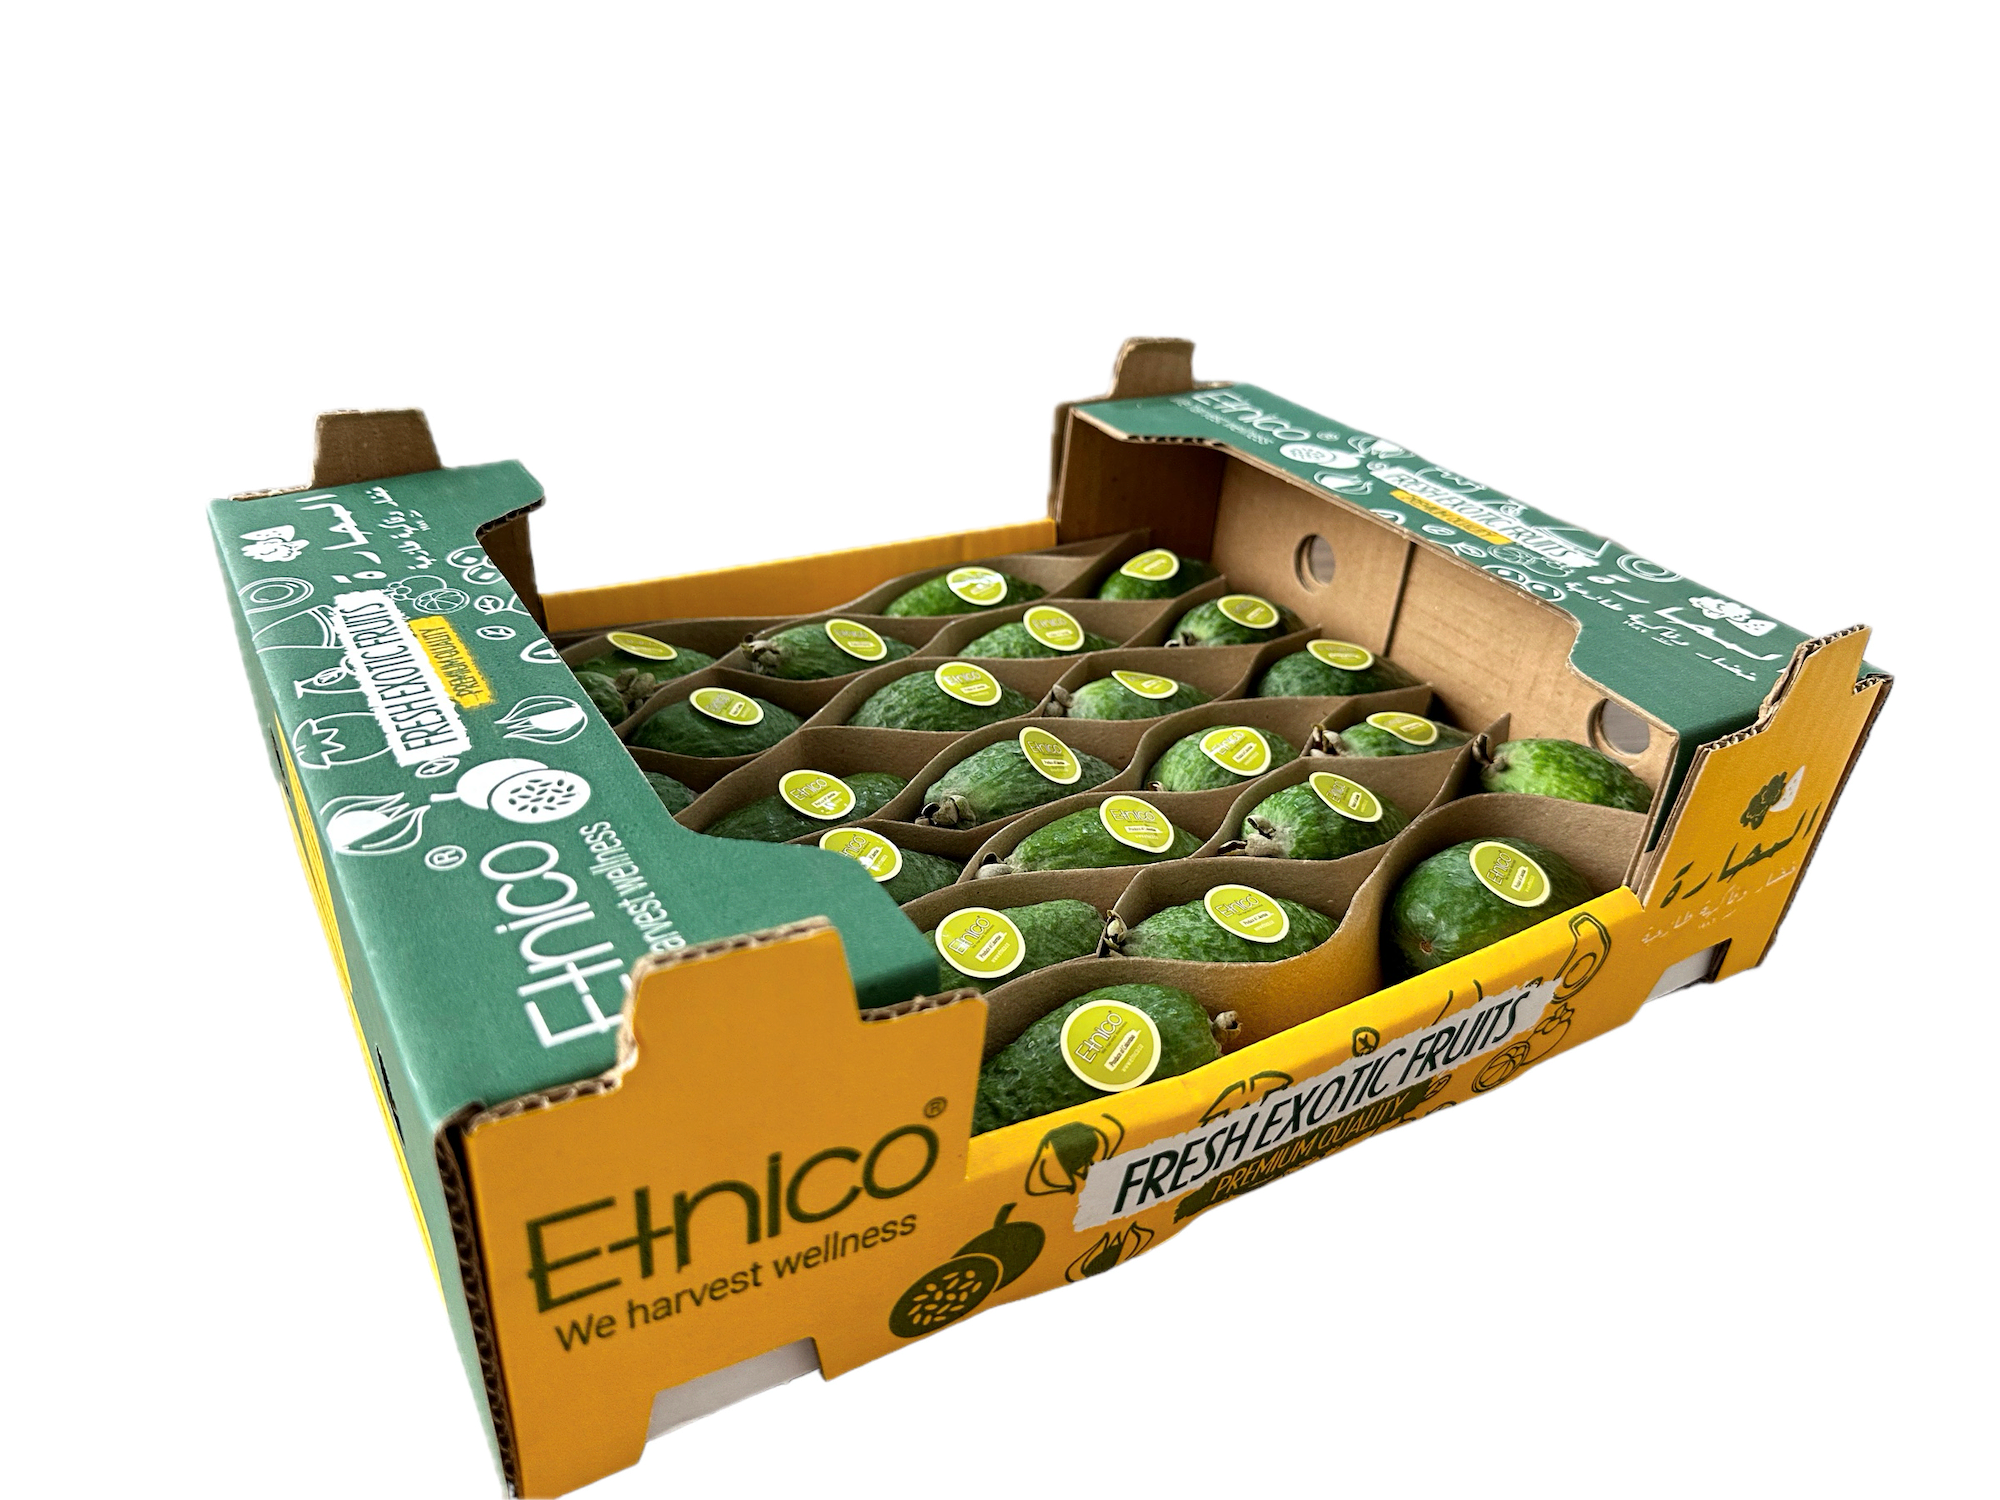 Feijoa 2 Background Removed